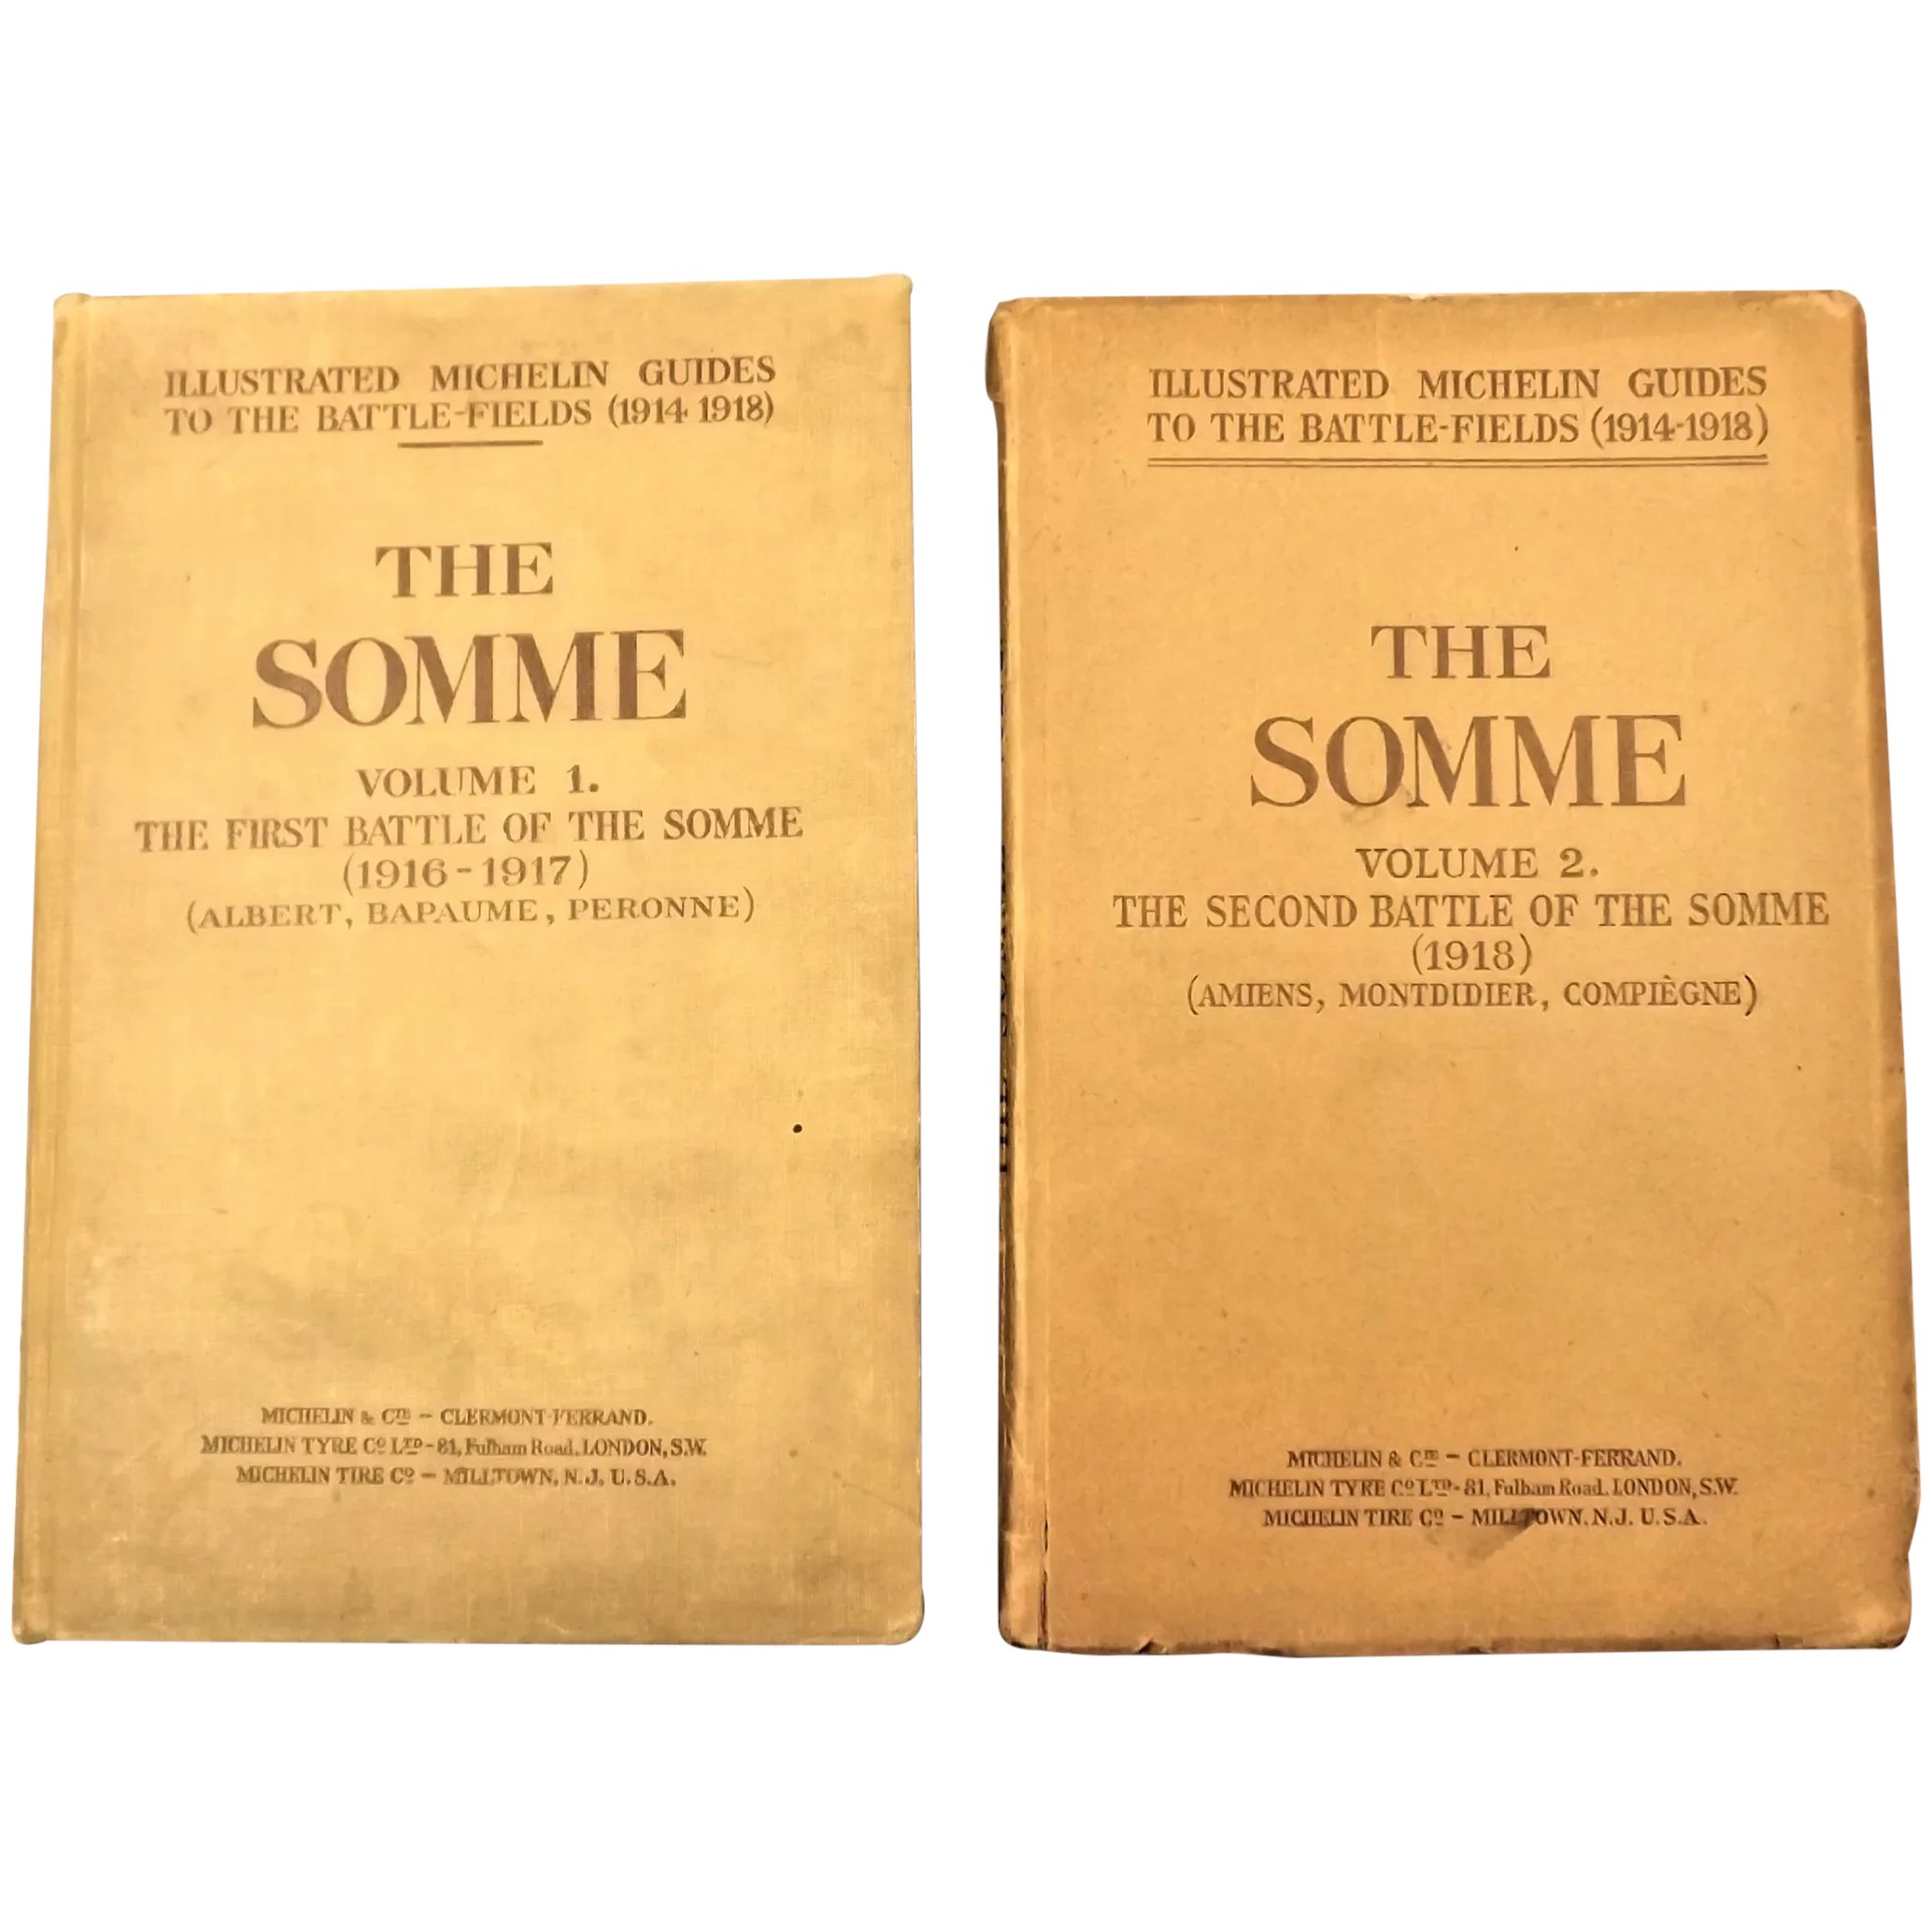 THE SOMME In Two Volumes - Illustrated Michelin Guides 1919